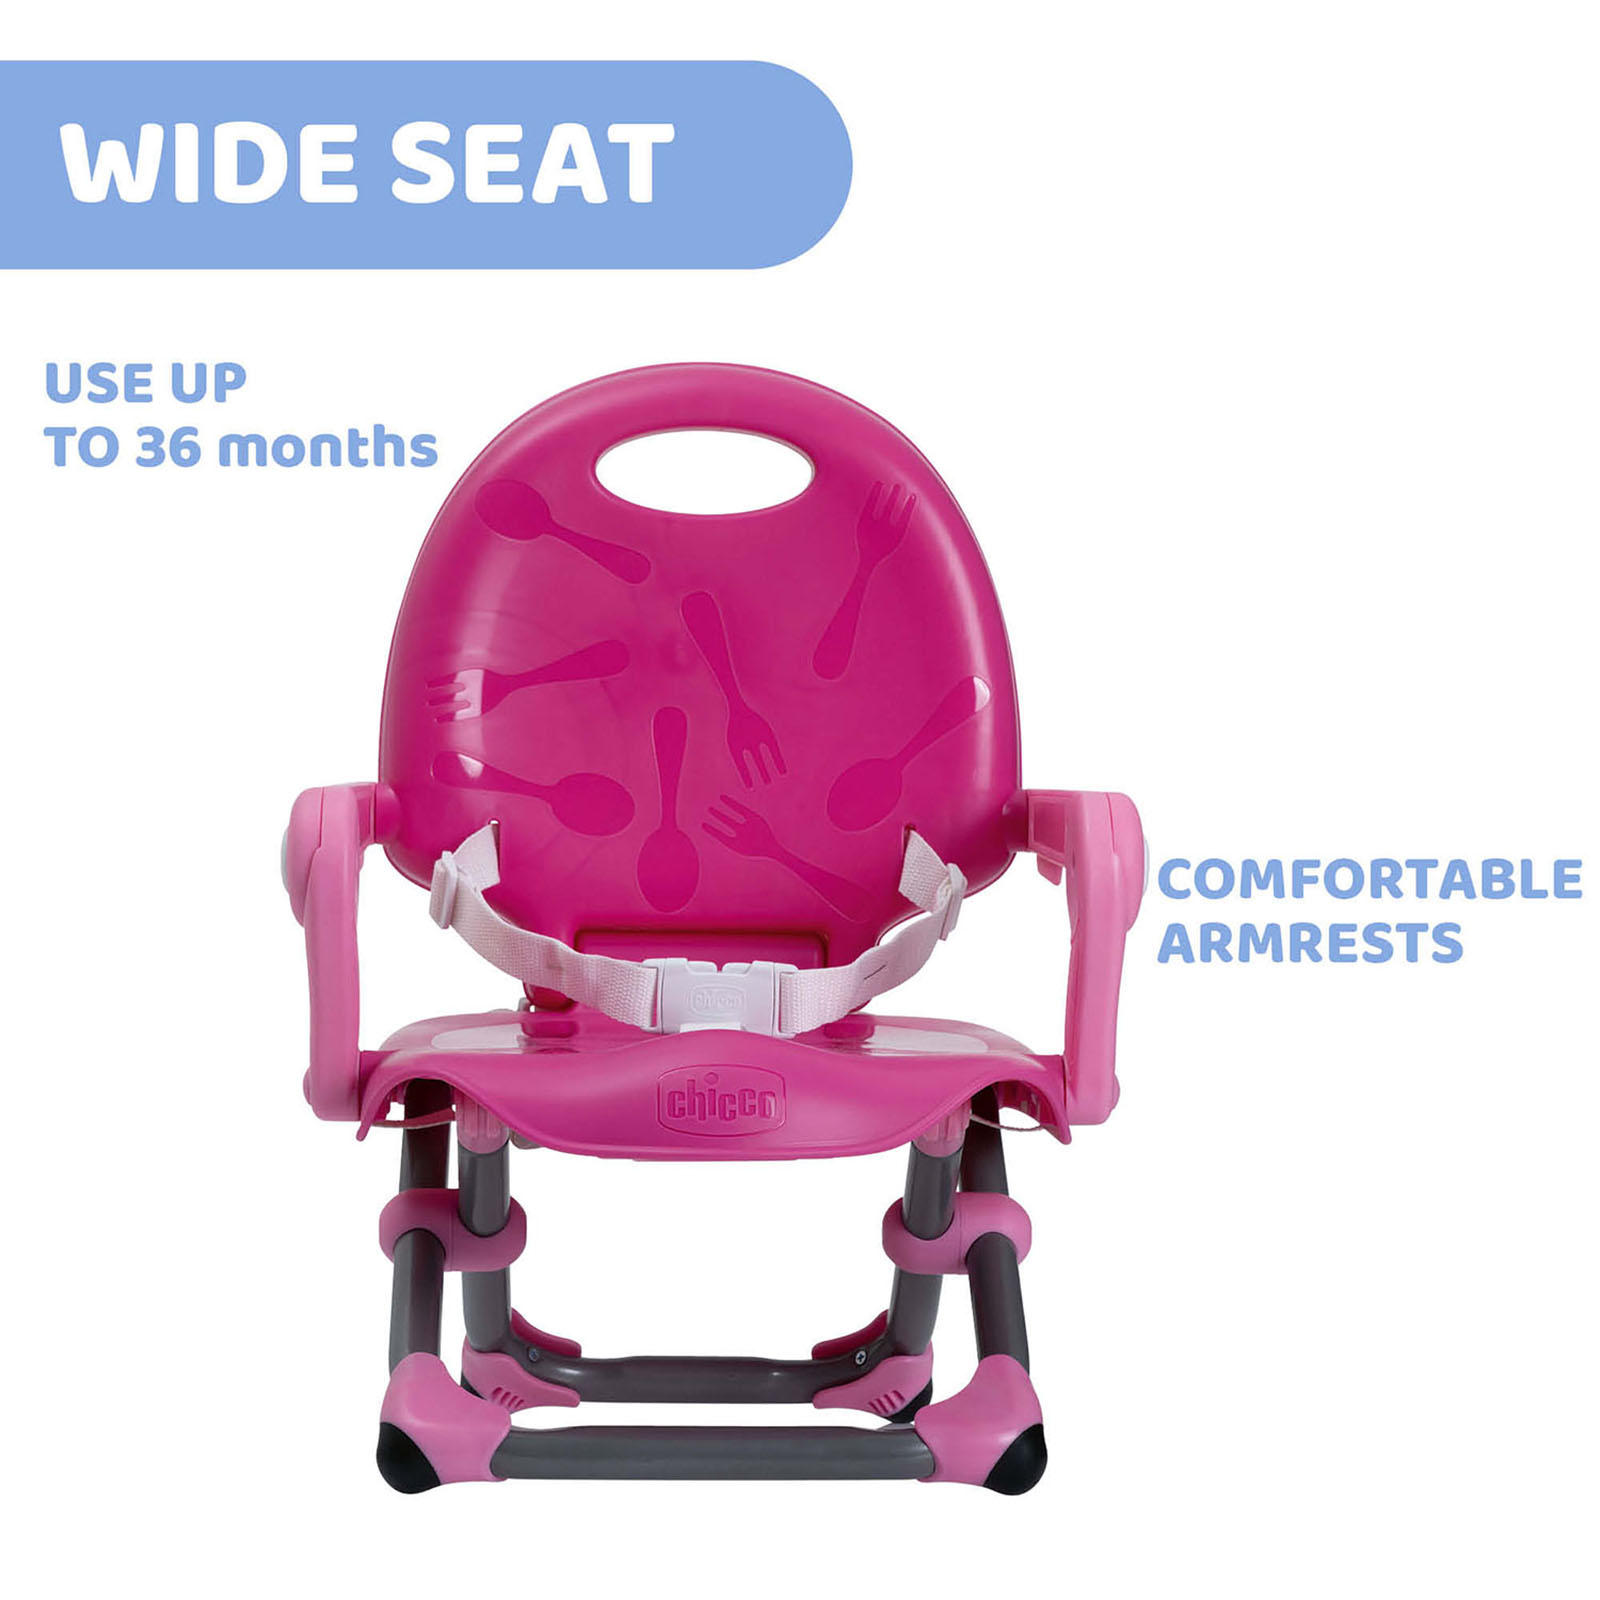 Chicco Pocket Snack Booster Seat 